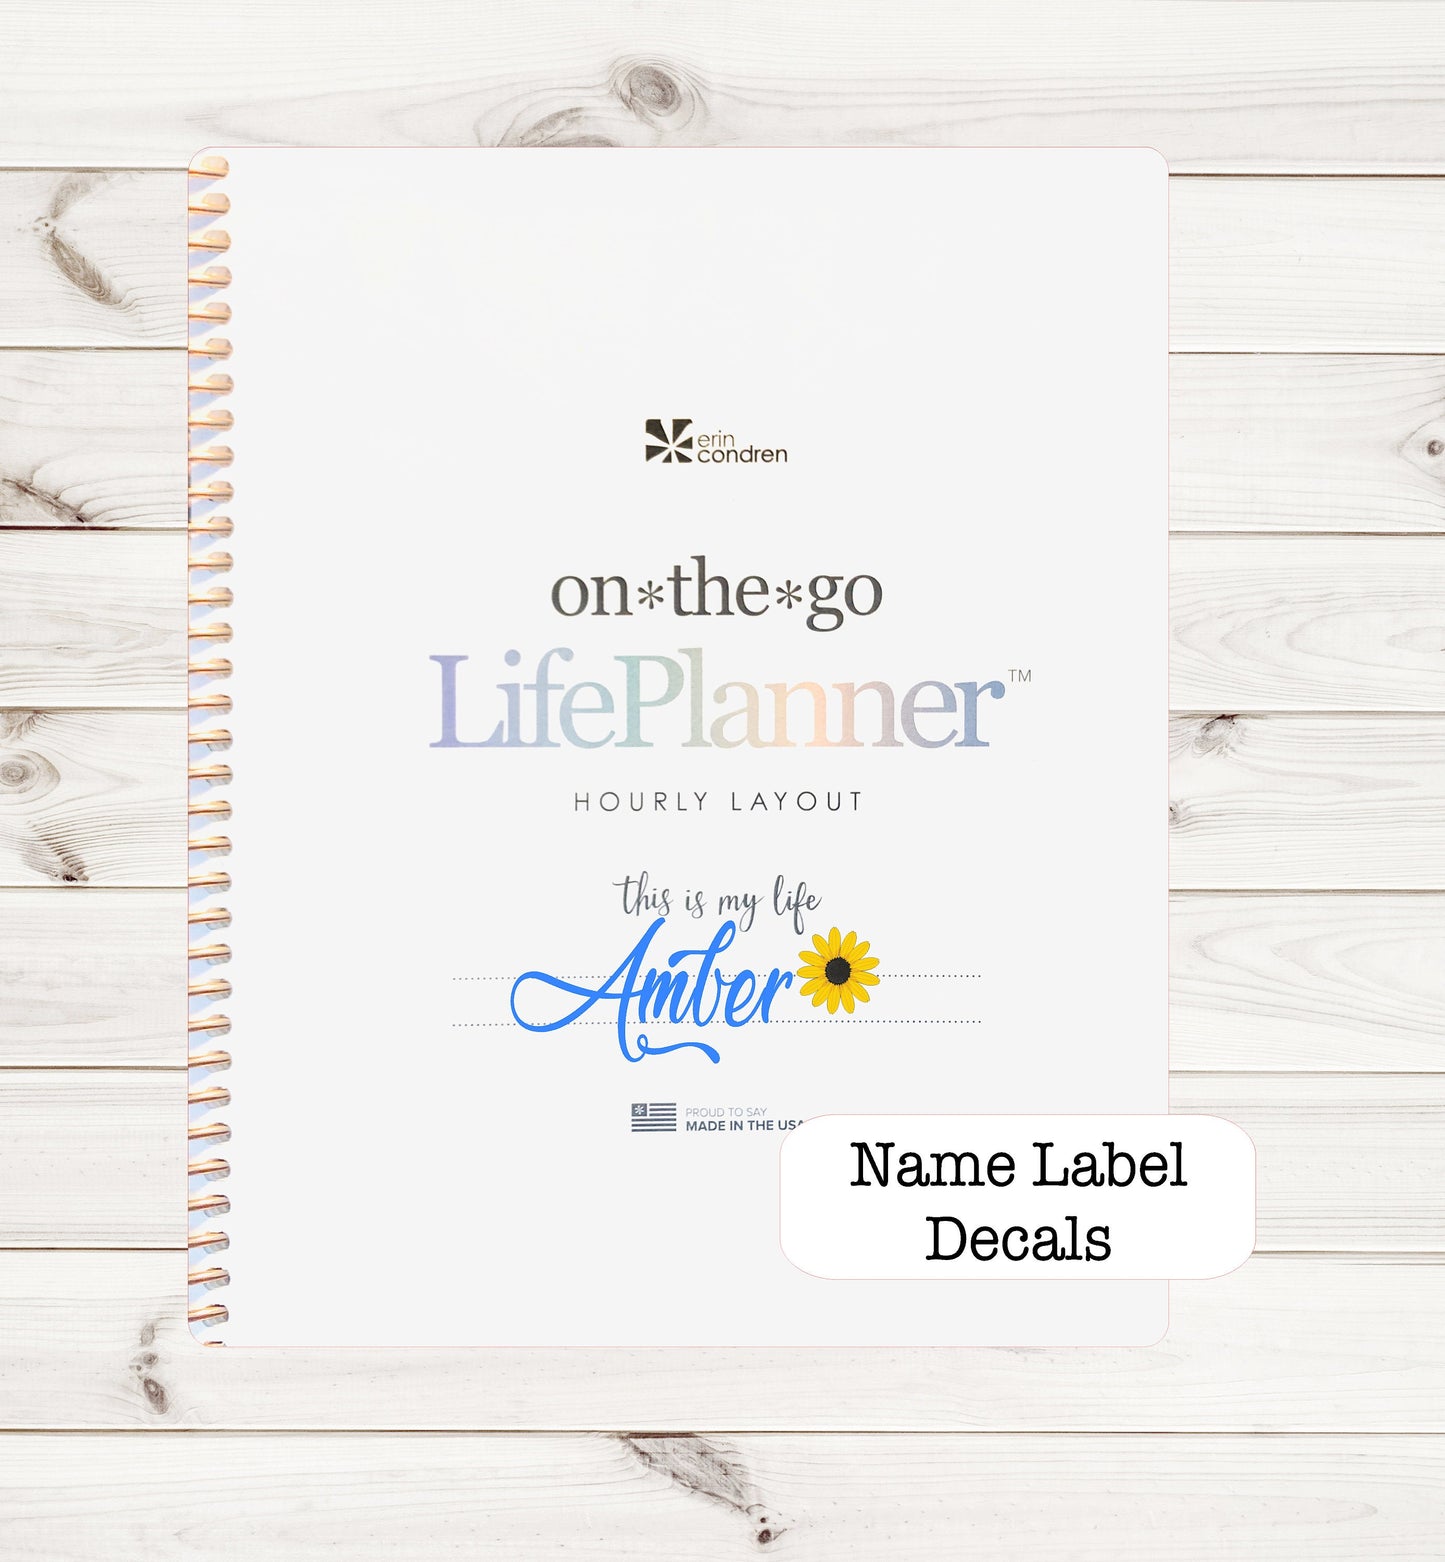 PLANNER NAME DECAL Lovely Home Decal for Planner Custom Name Stickers Custom Planner Decal eclp Sticker Name Eclp Name Decal Ec Name Decal